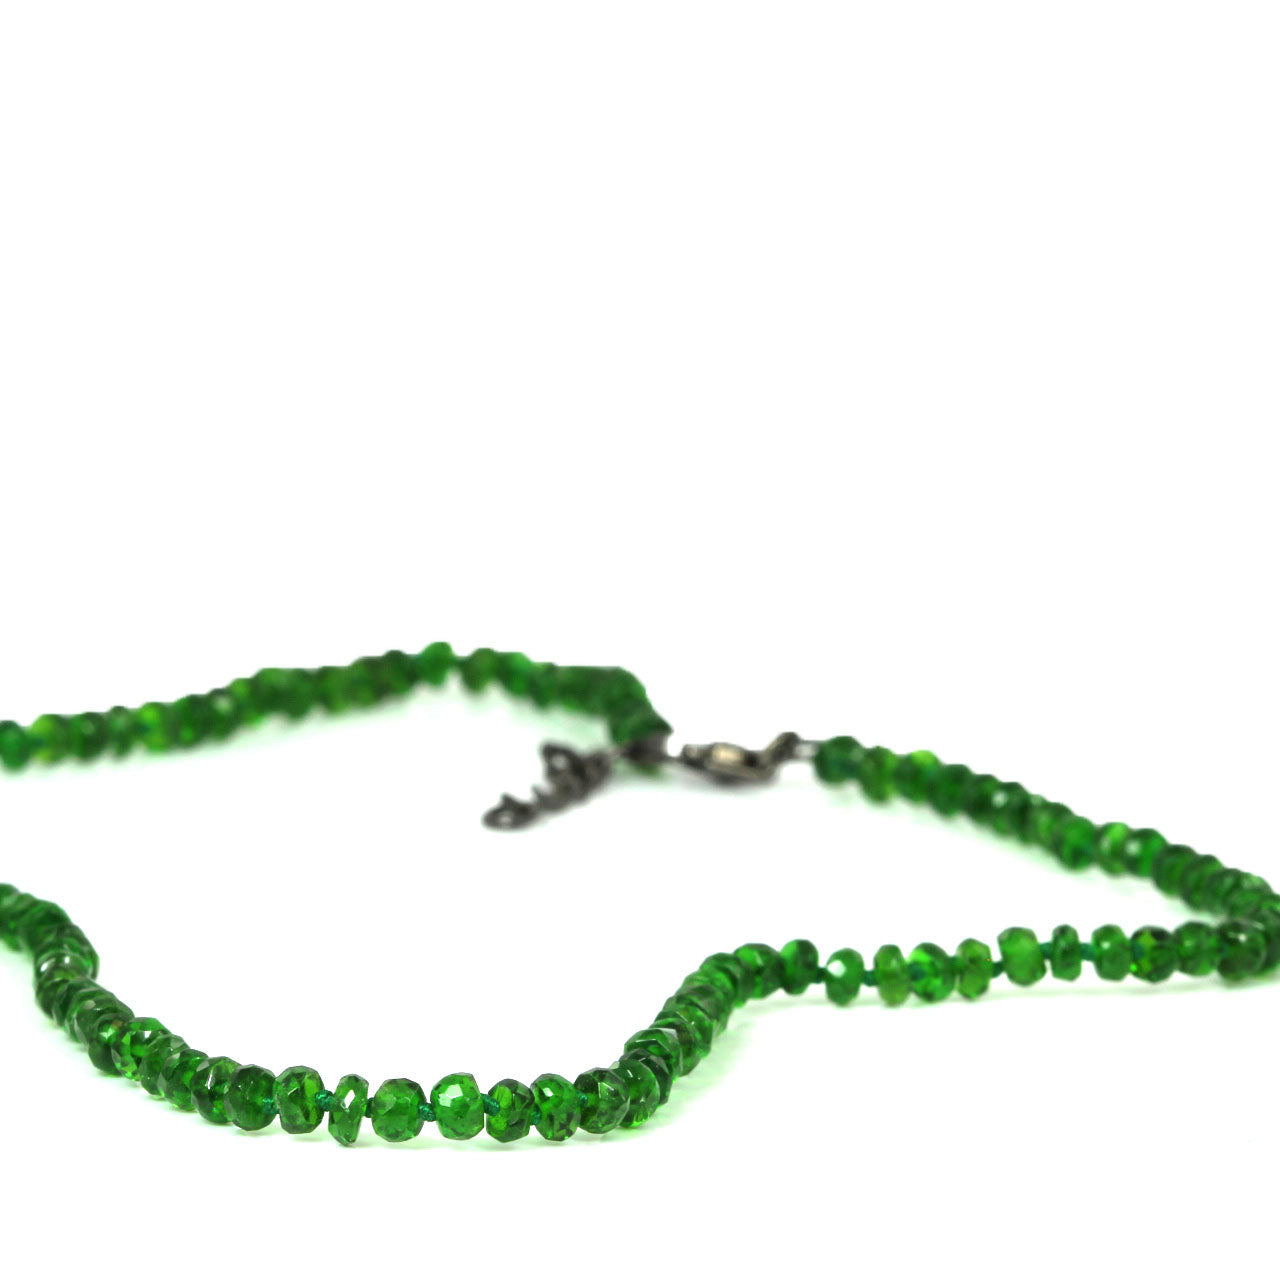 Chrome Diopside Bead Necklace